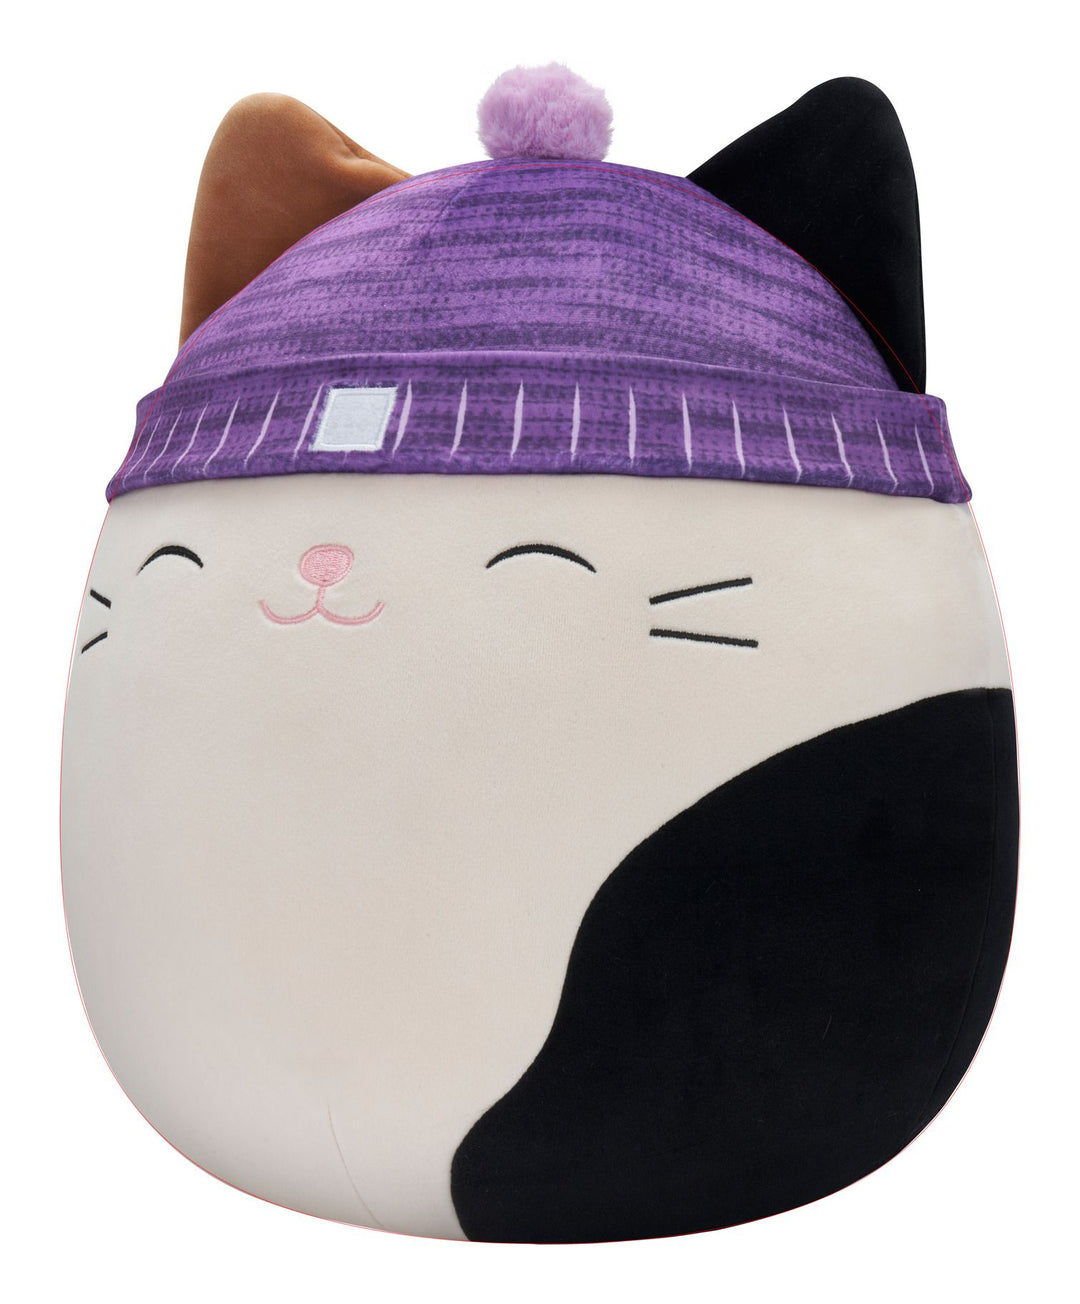 Squishmallows 16" Cam the Calico Cat with Beanie Plush